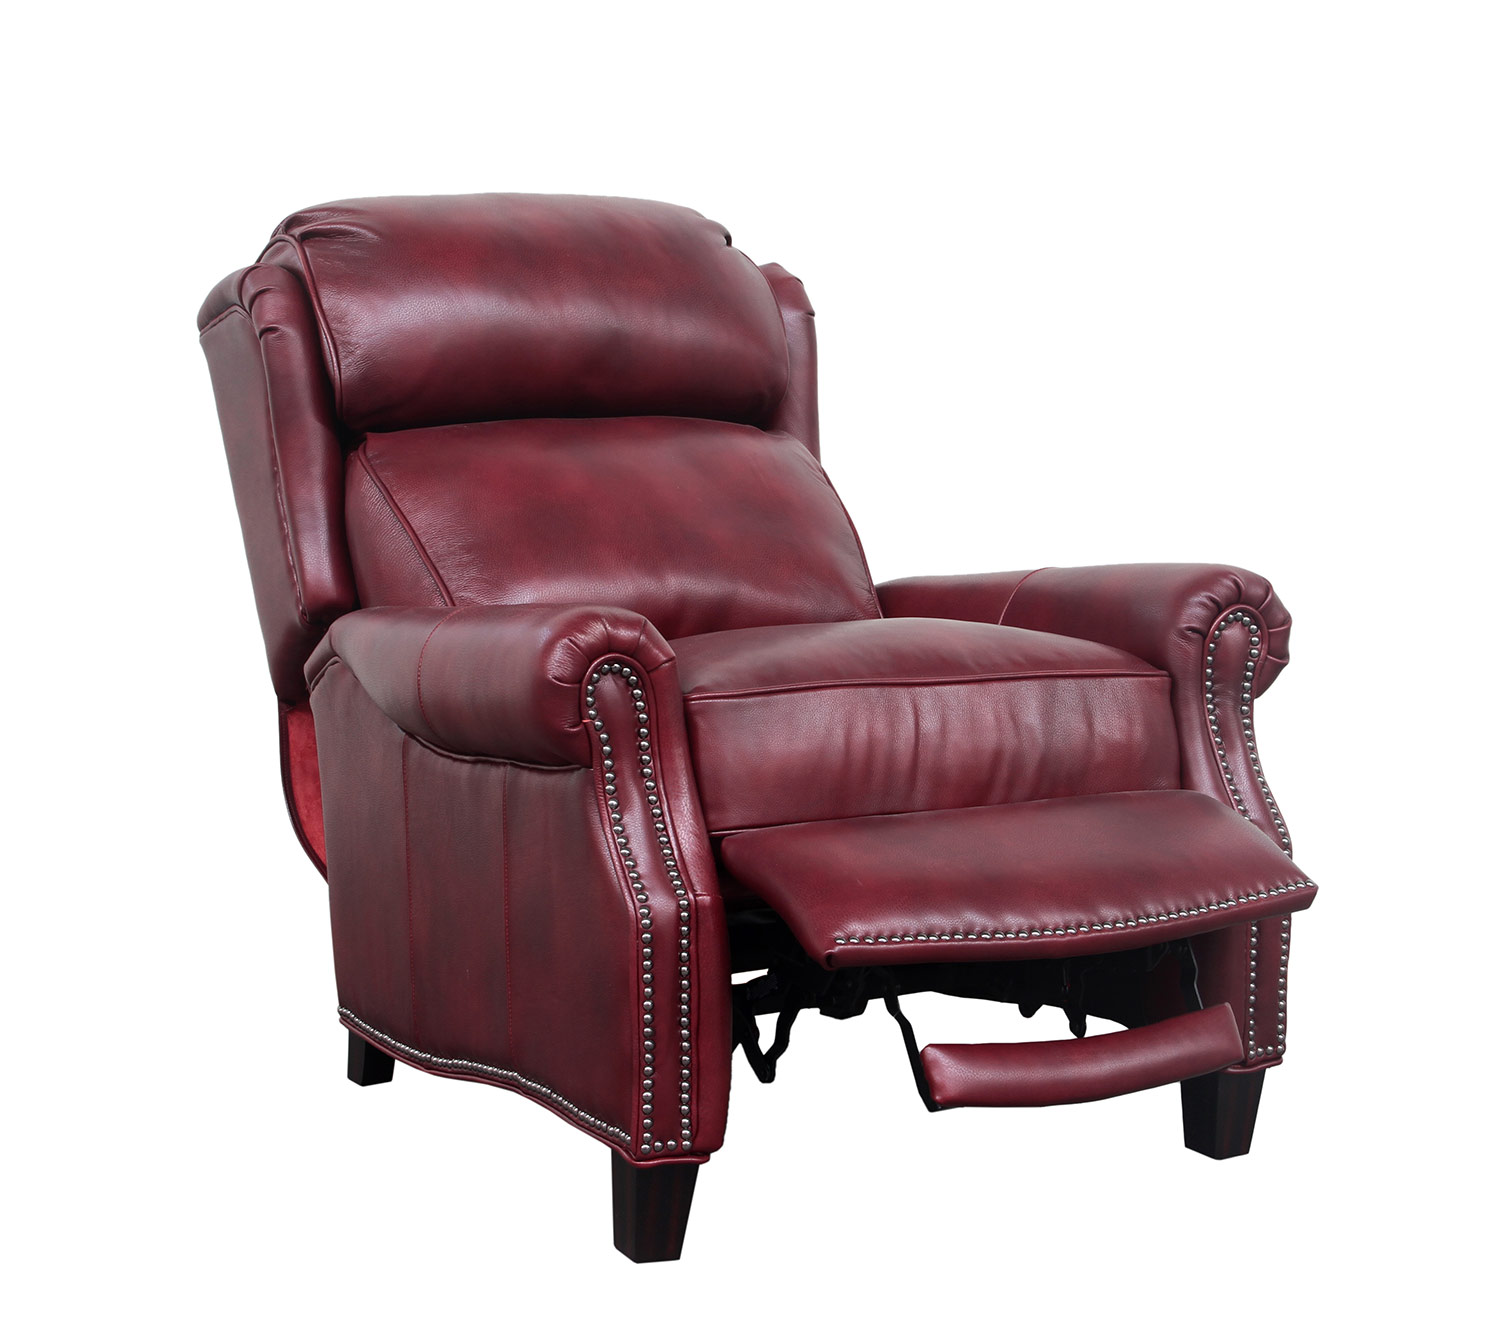 Barcalounger Meade Recliner Chair - Wenlock Carmine/all leather